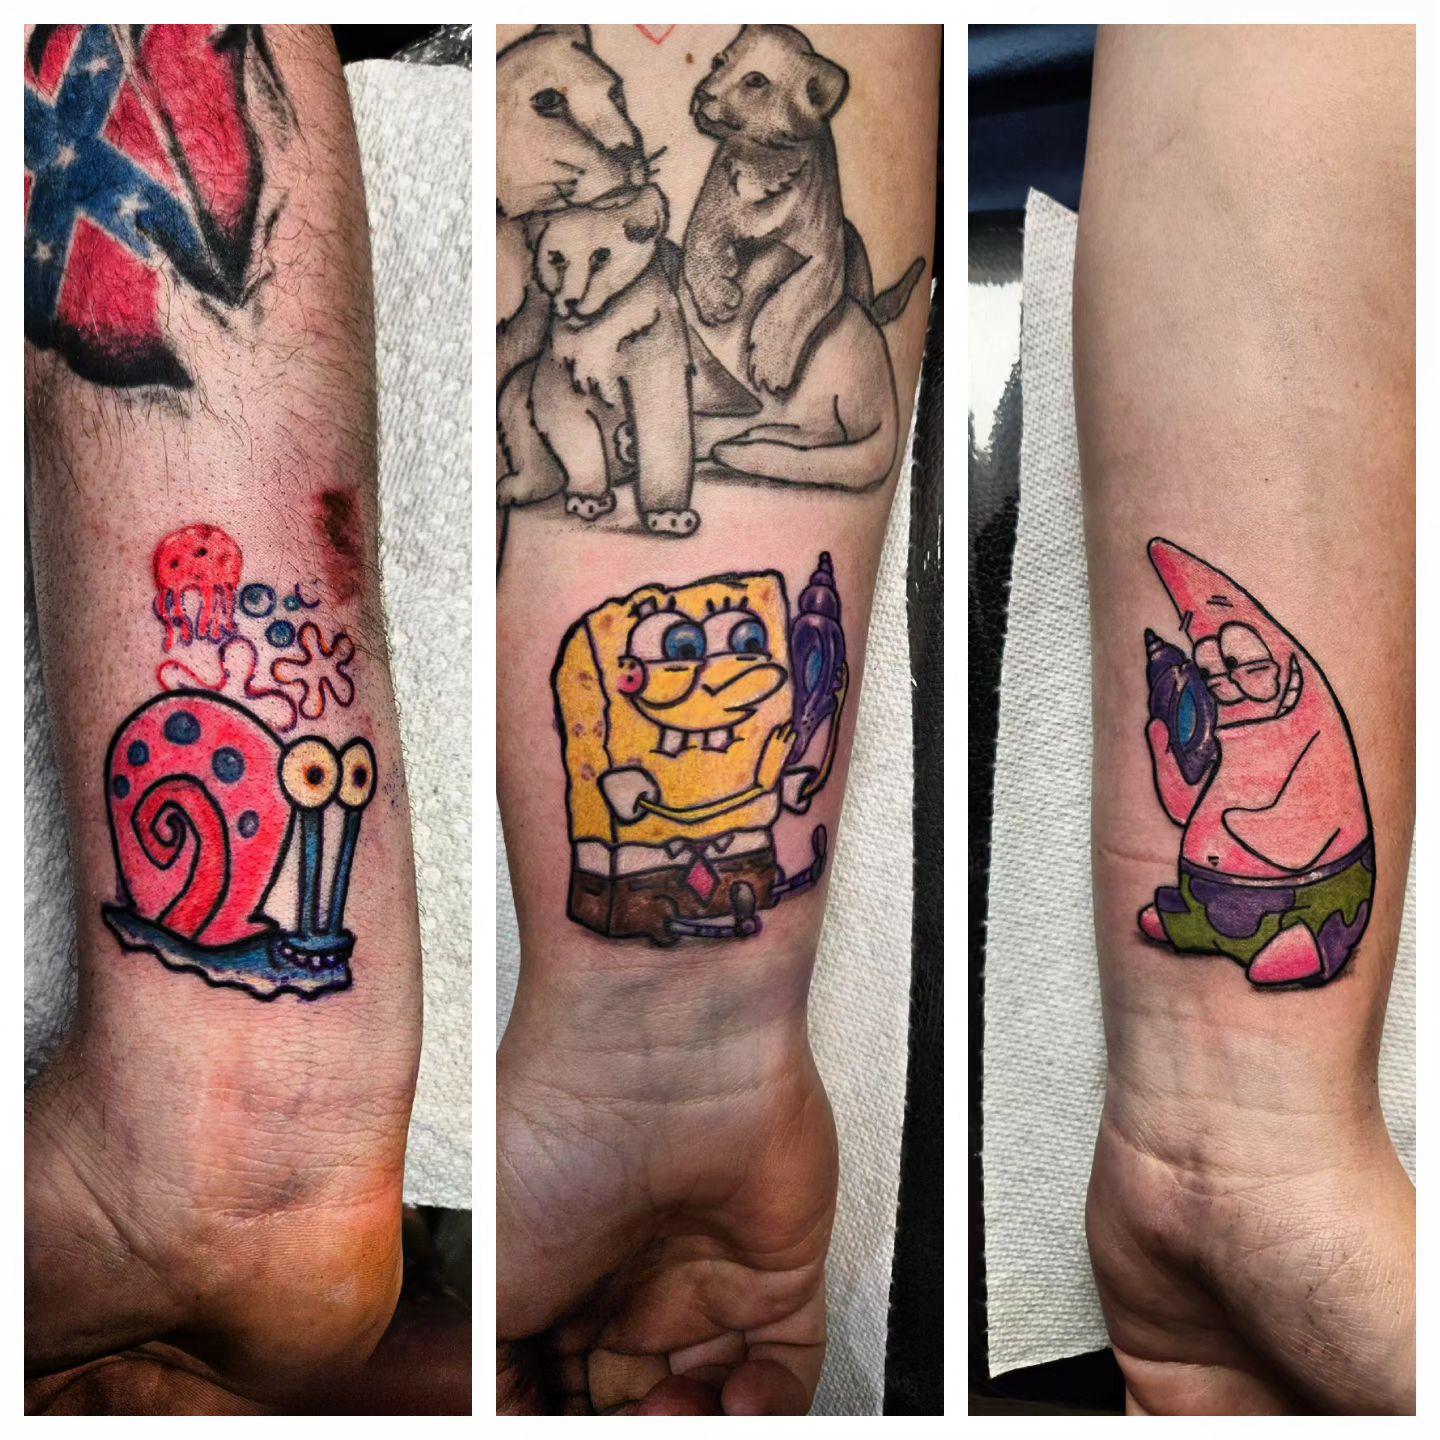 Spongebob Tattoos Designs Ideas and Meaning  Tattoos For You